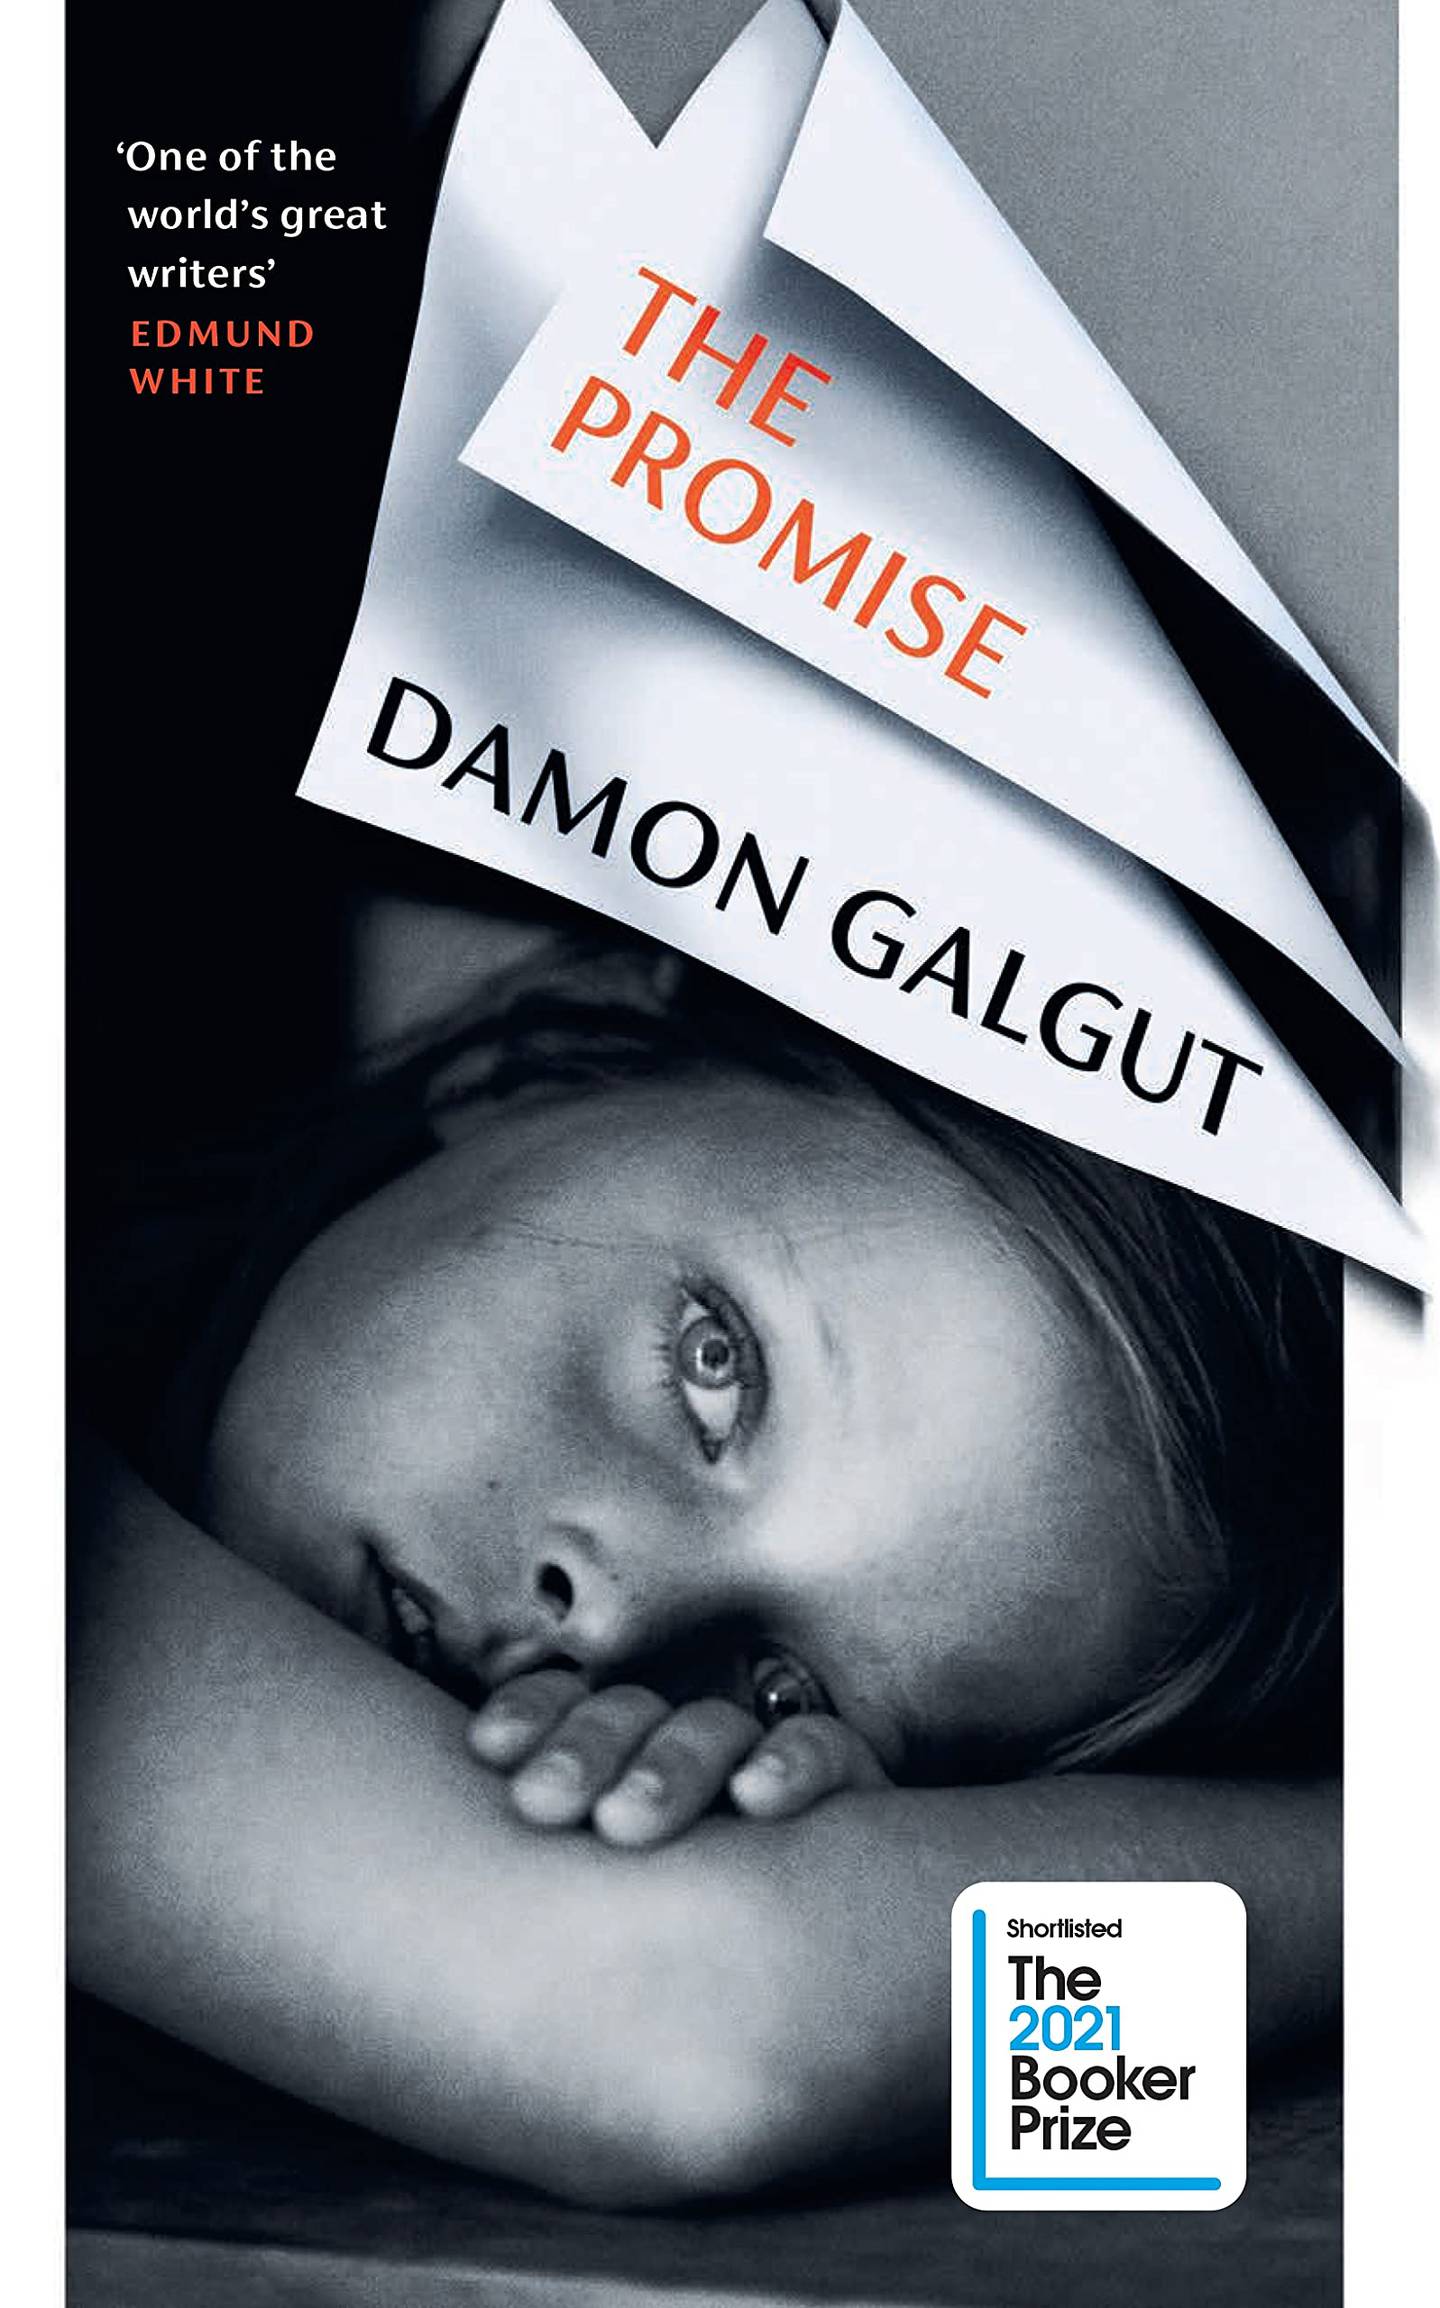 Damon Galgut revisits the effect of apartheid on generations of South African life in 'The Promise'. Photo: Chatto & Windus